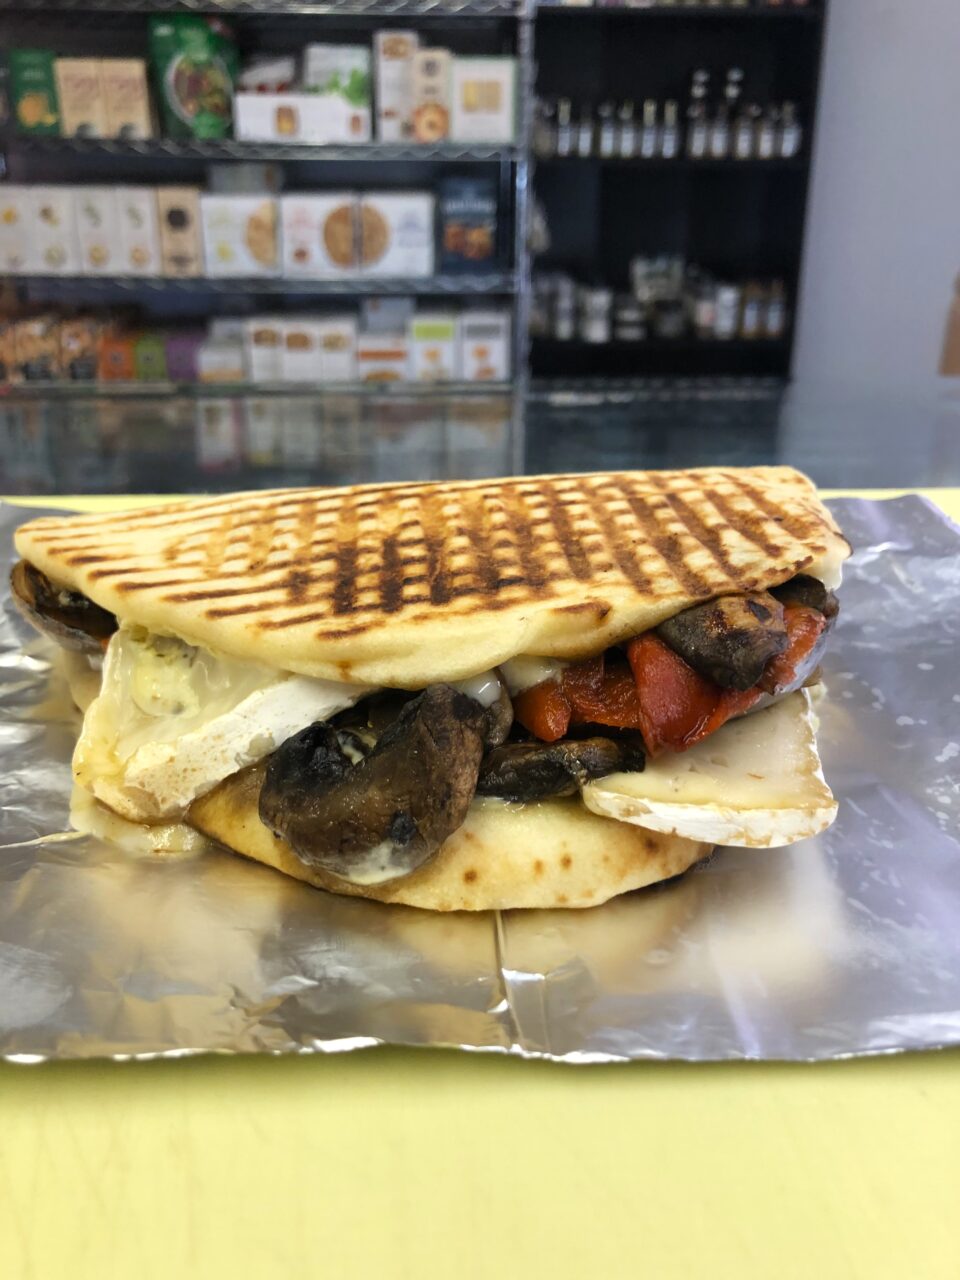 Flat bread sandwich with grilled veggies and brie